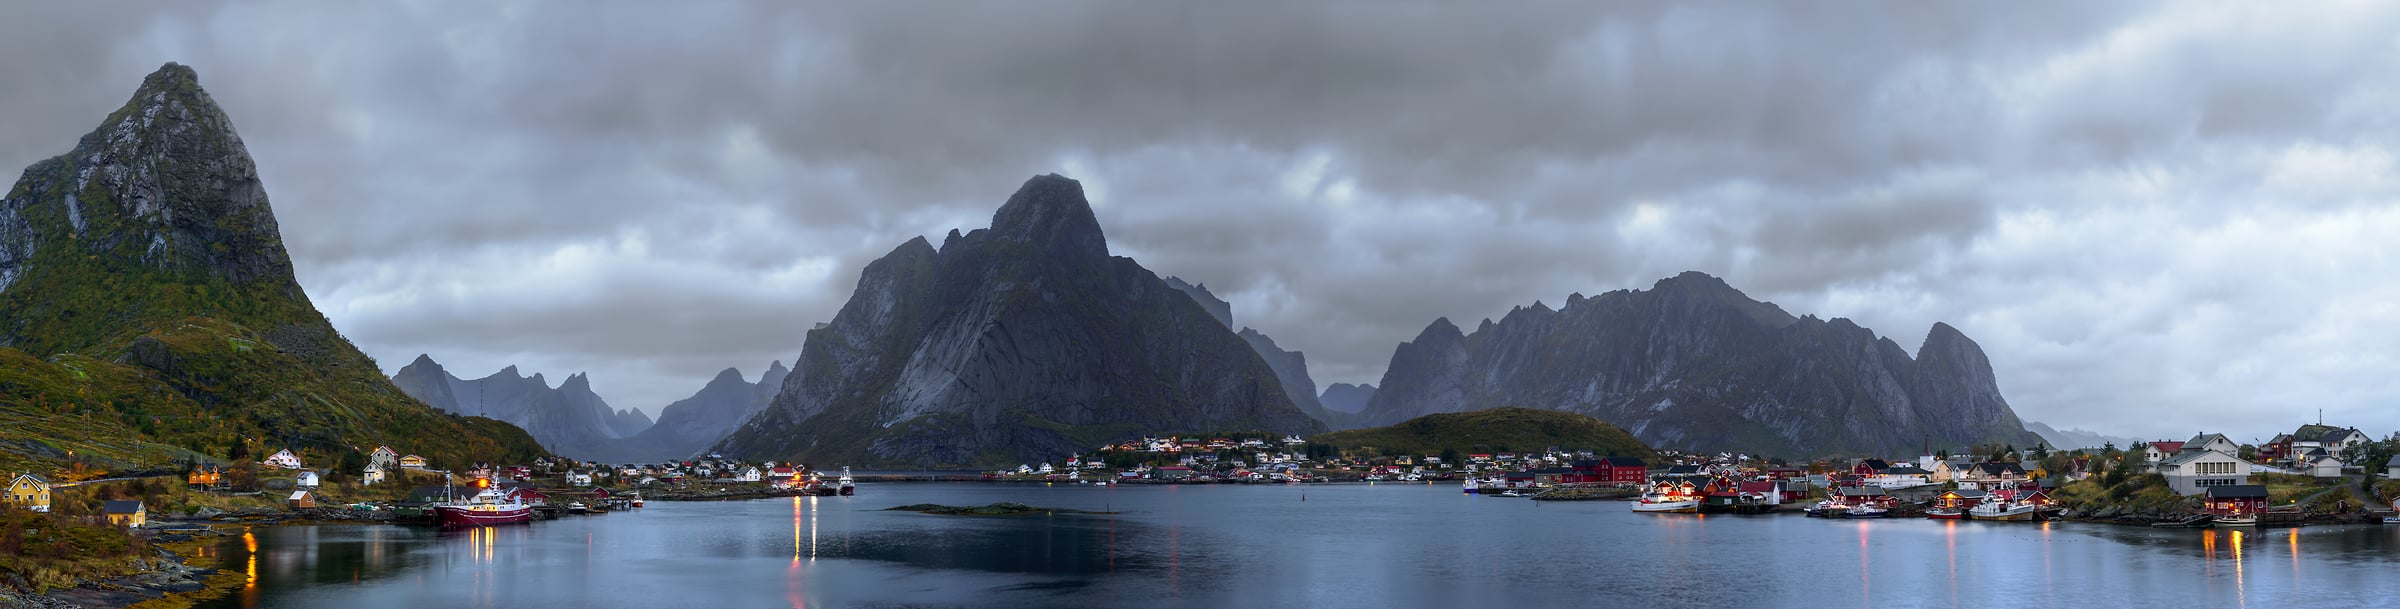 1,701 megapixels! A very high resolution, large-format VAST photo print of a moody landscape with mountains, clouds, a fishing town, and water; photograph created by Ennio Pozzetti in Reine, Lofoten, Norway.